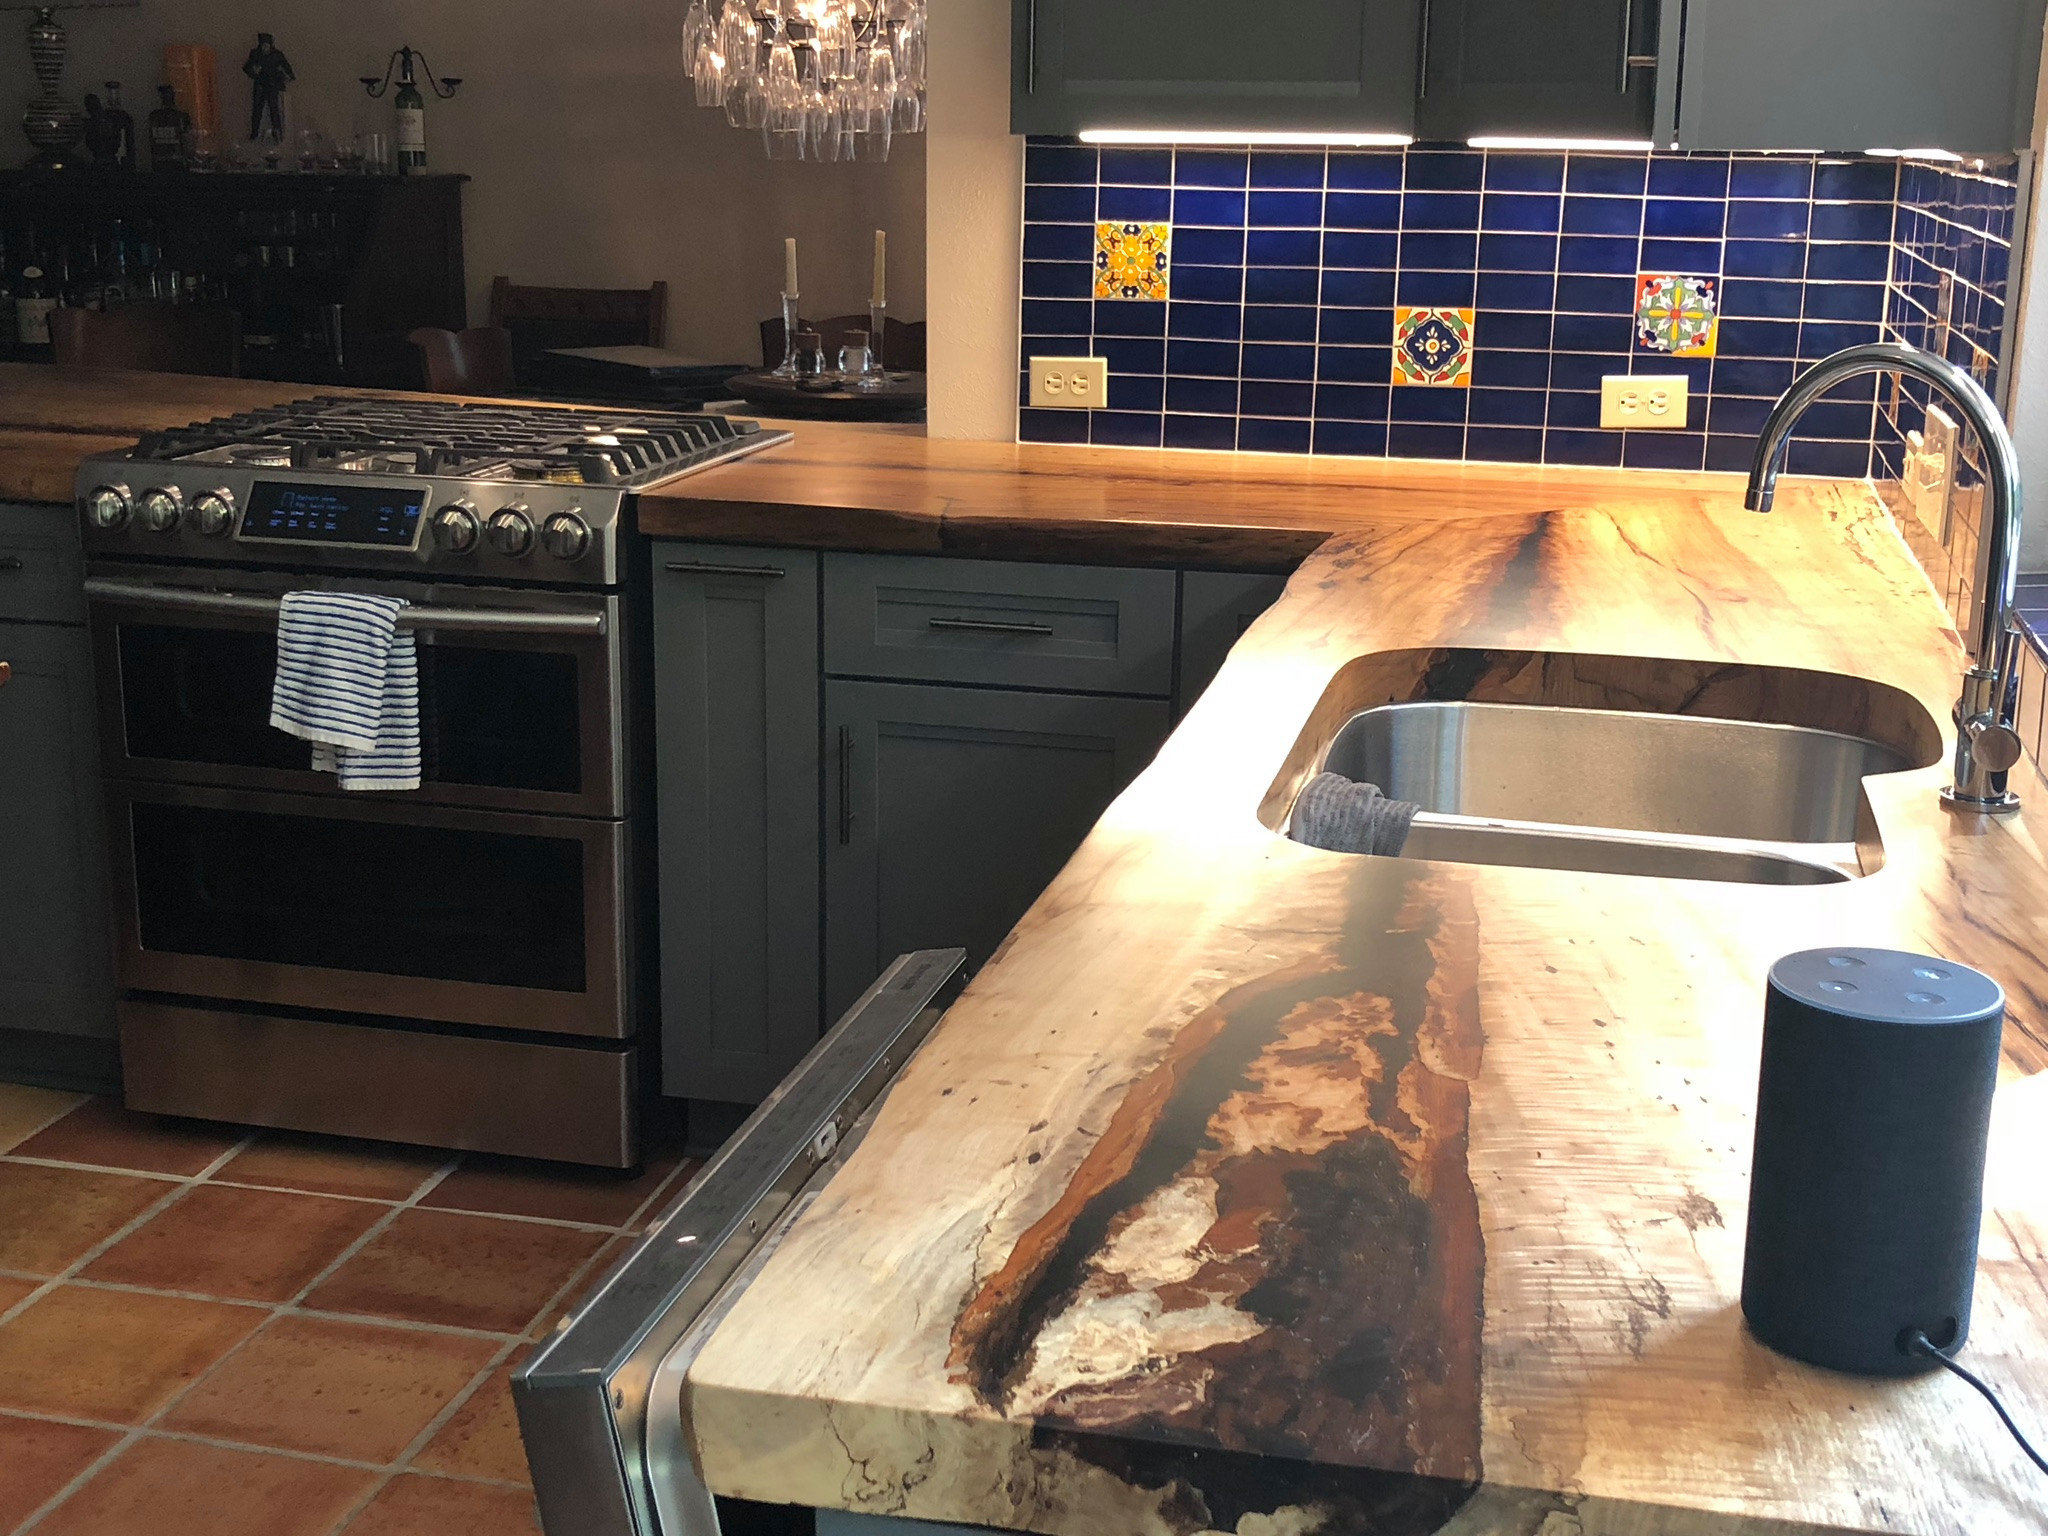 Live edge Slabs for the Kitchen